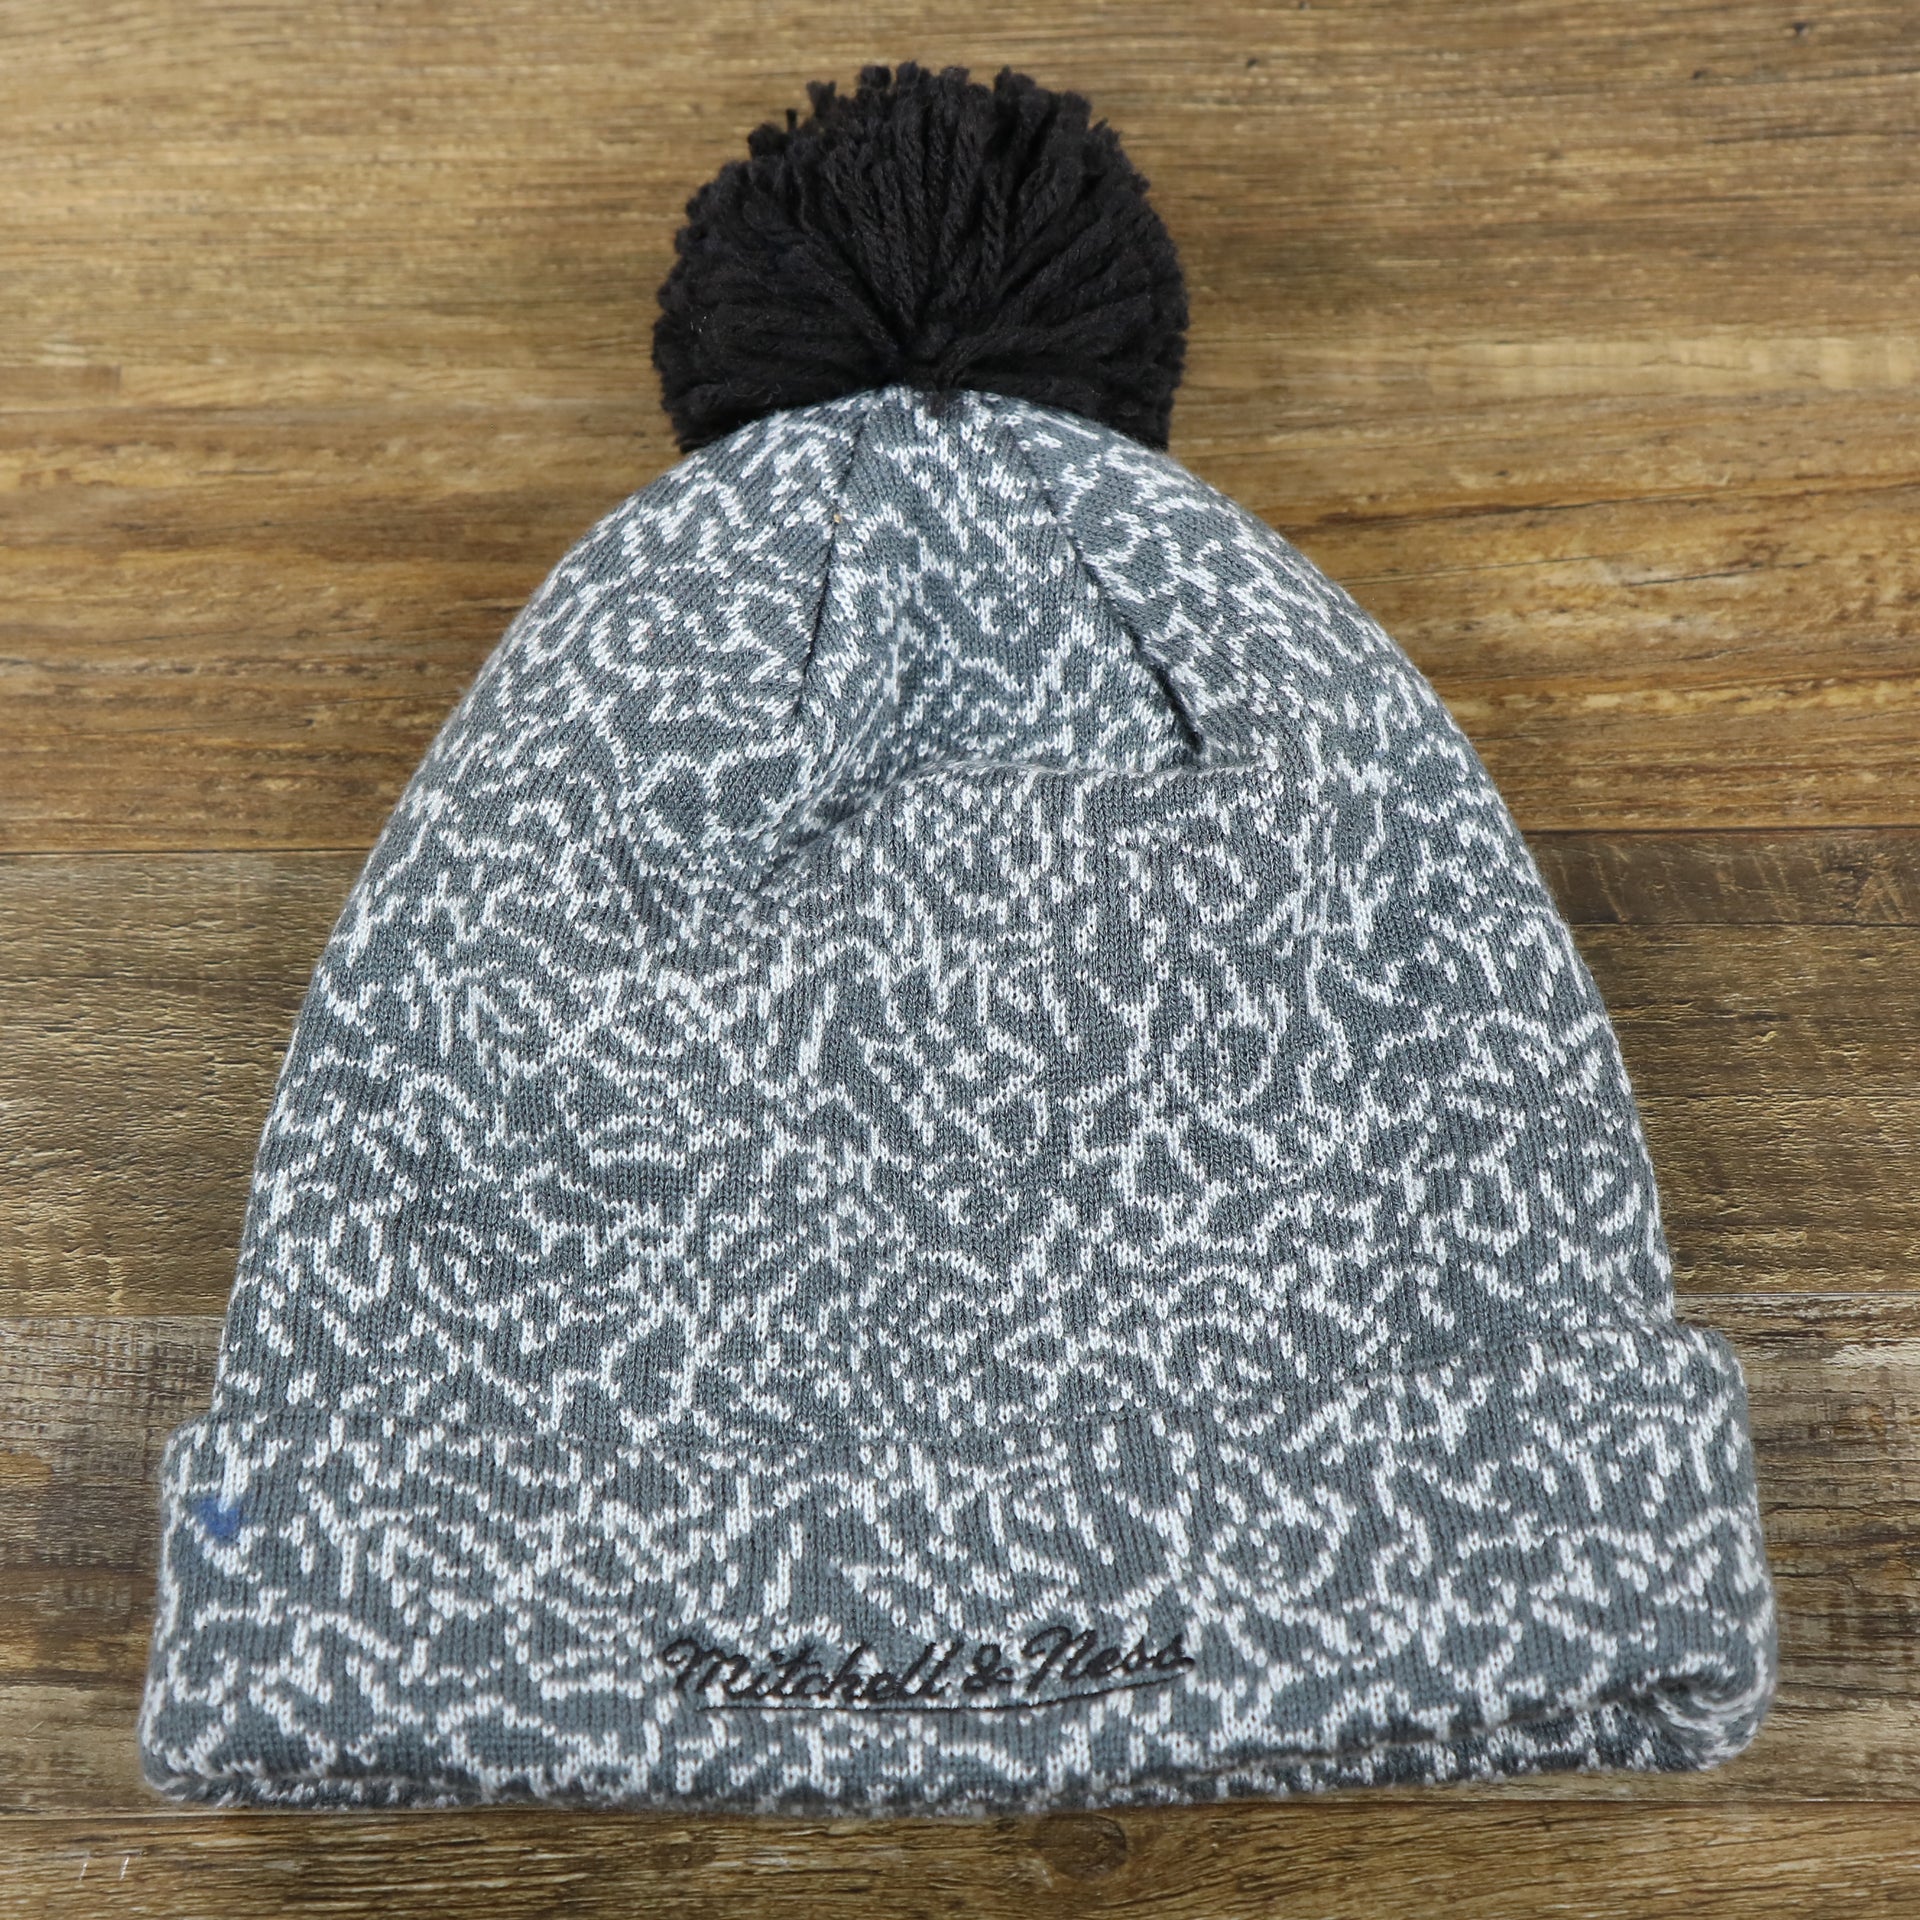 The backside of the Brooklyn Nets Jordan 3 Matching Concrete Print Winter Beanie With Pom Pom | Gray Winter Beanie